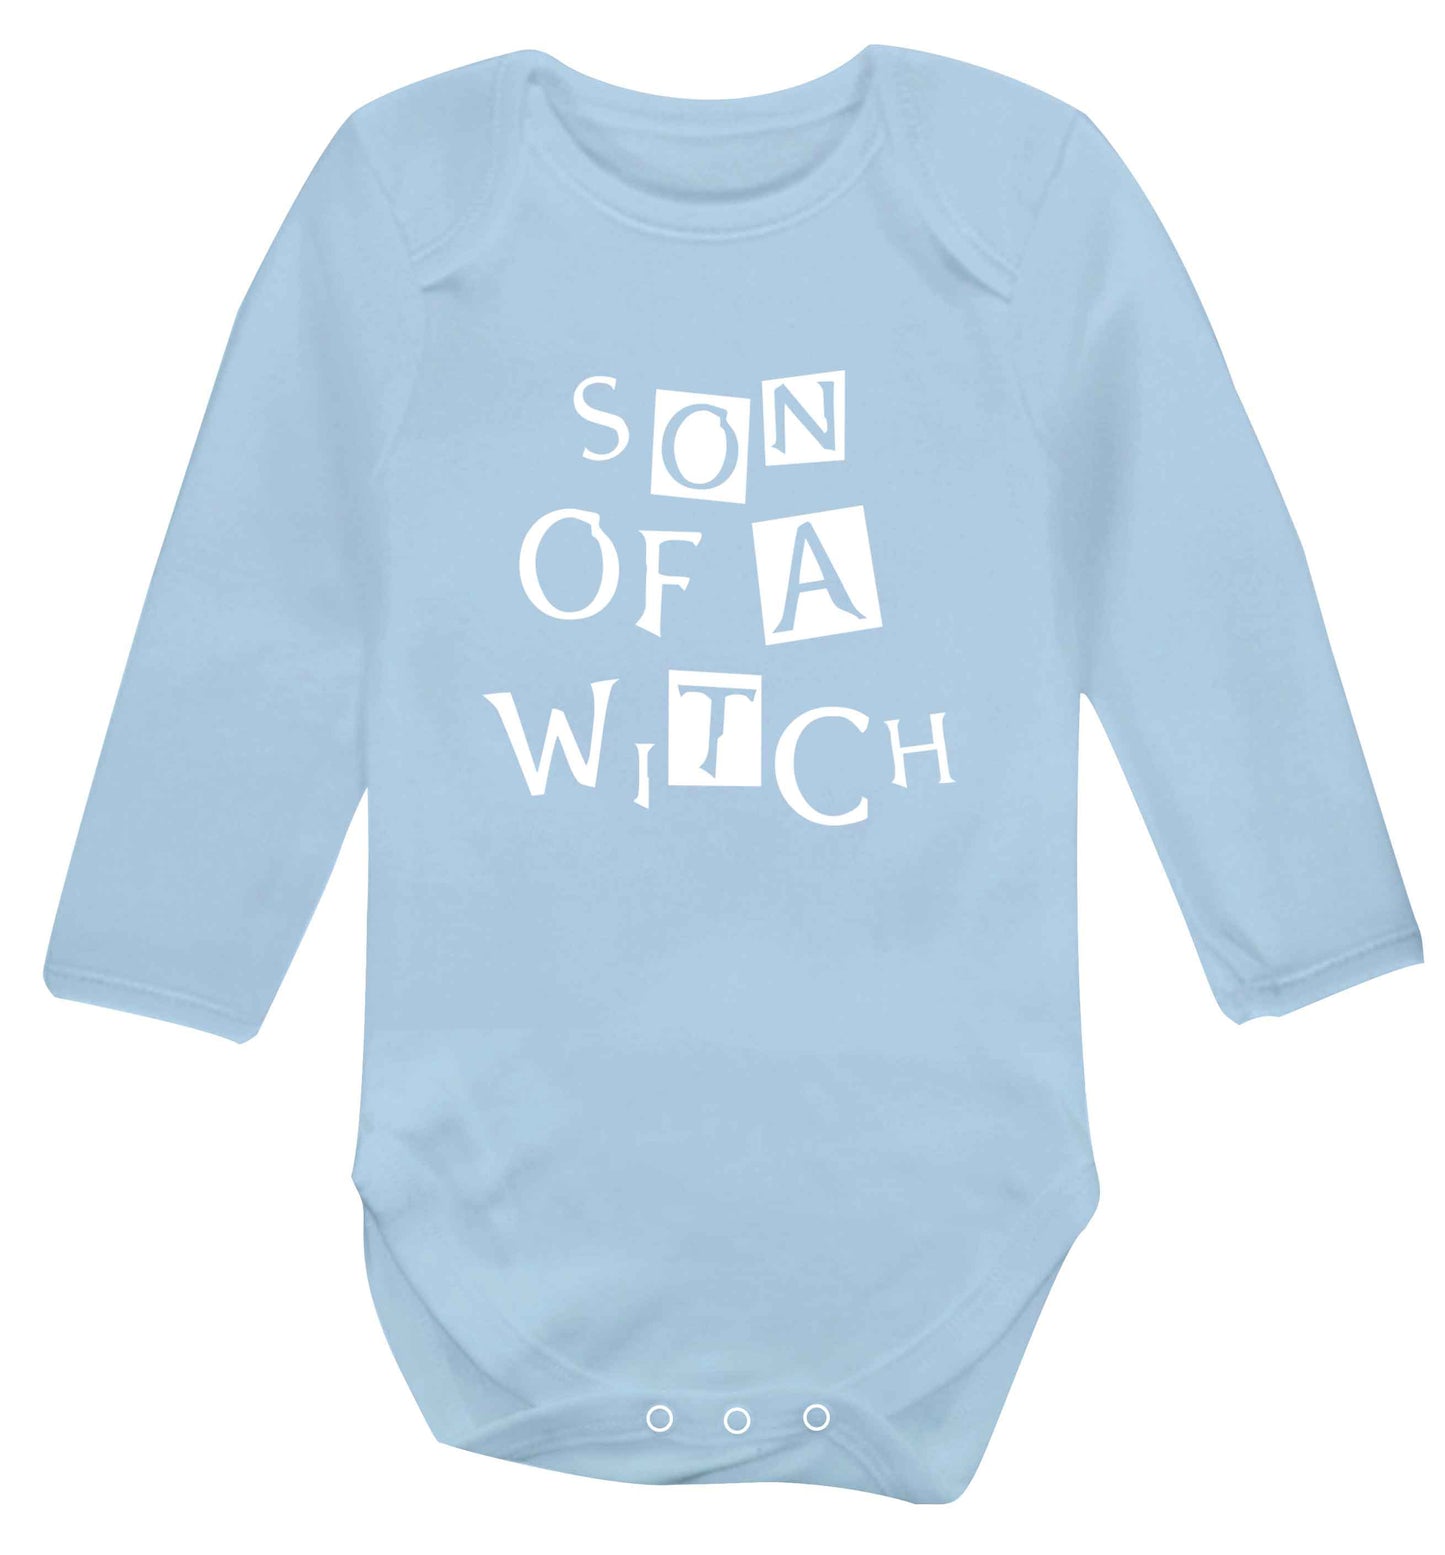 Son of a witch baby vest long sleeved pale blue 6-12 months